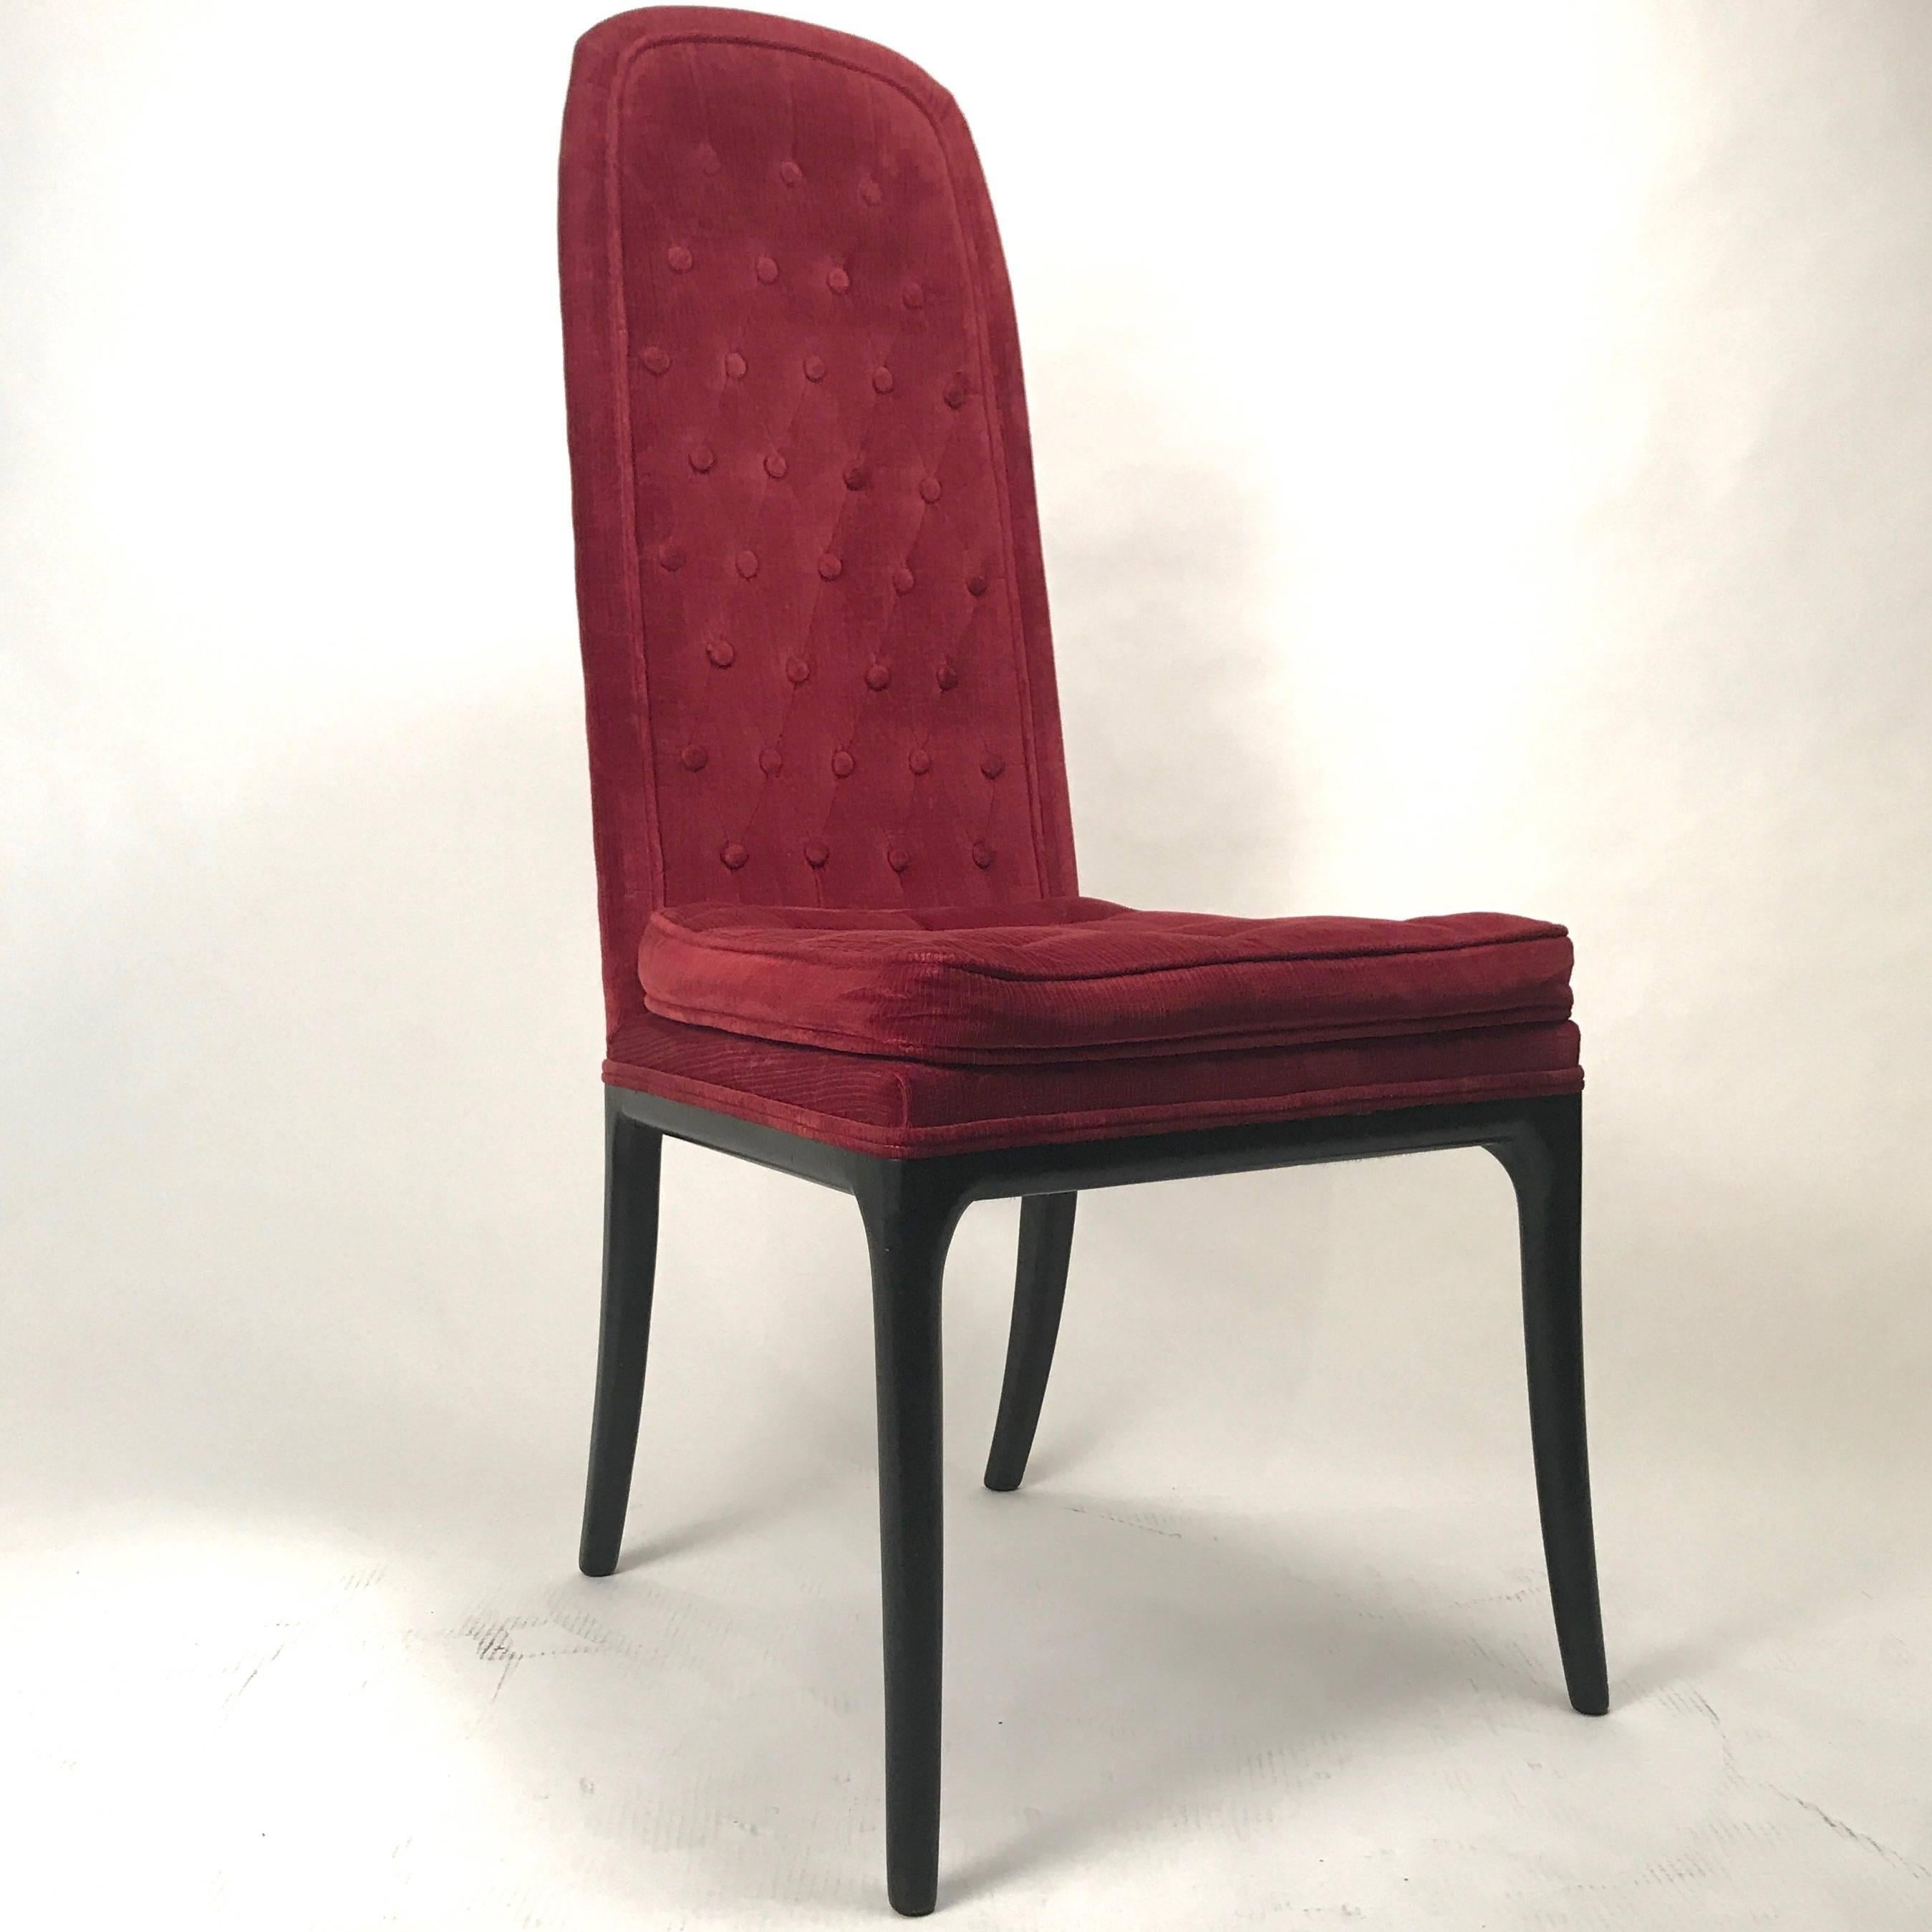 A set of six very elegant dining or occasional chairs in the original cranberry colored velour upholstery. Good usable original upholstery.